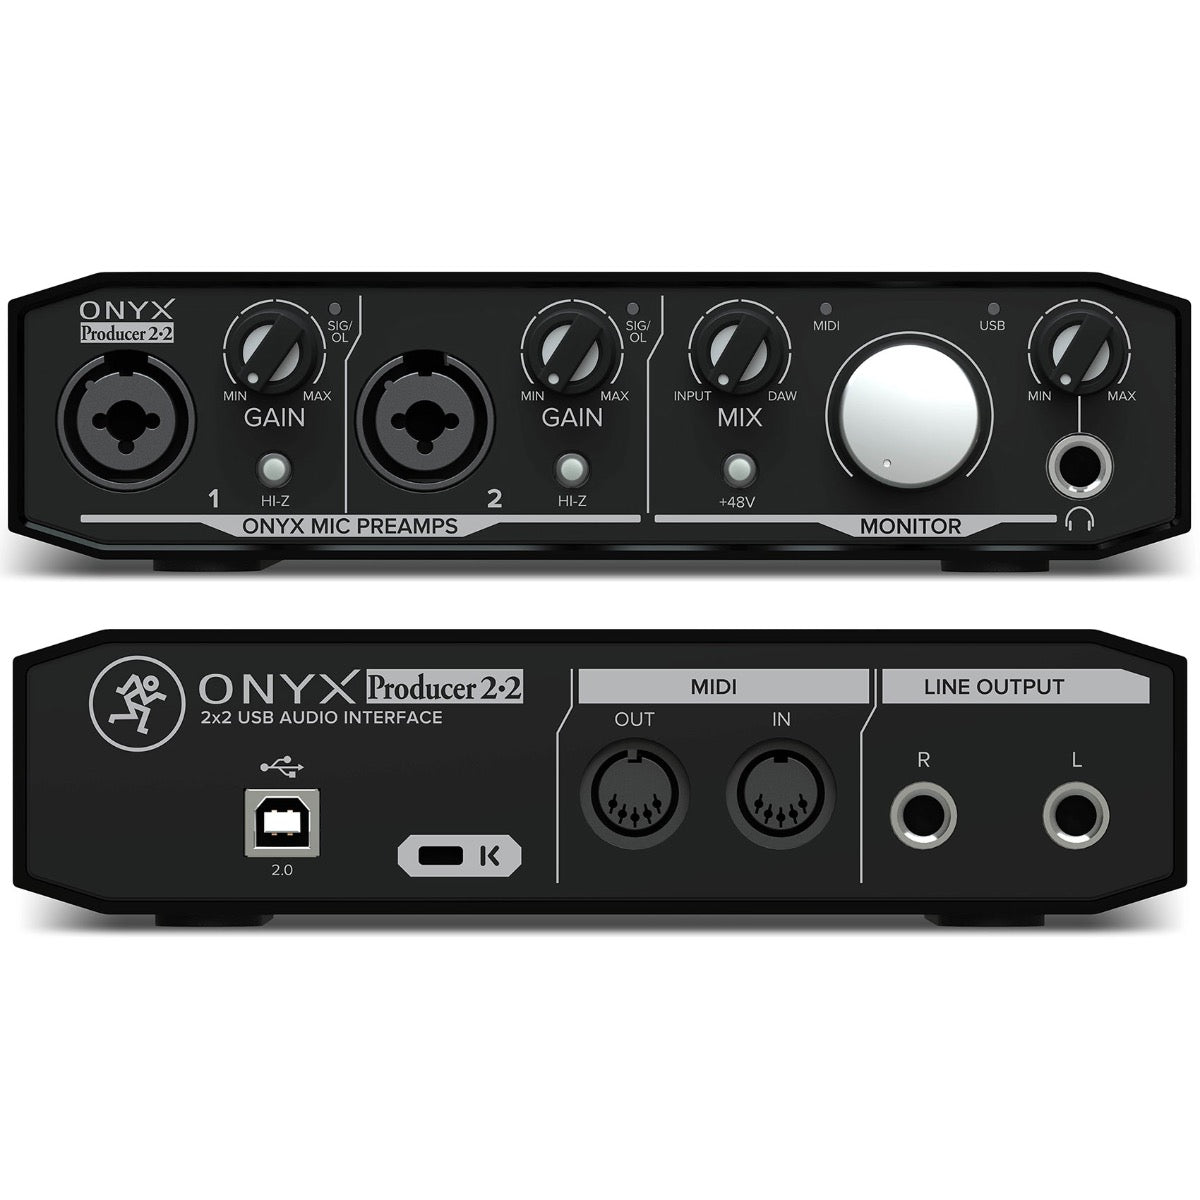 Stacked front and rear views of Mackie Onyx Producer 2•2 audio interface